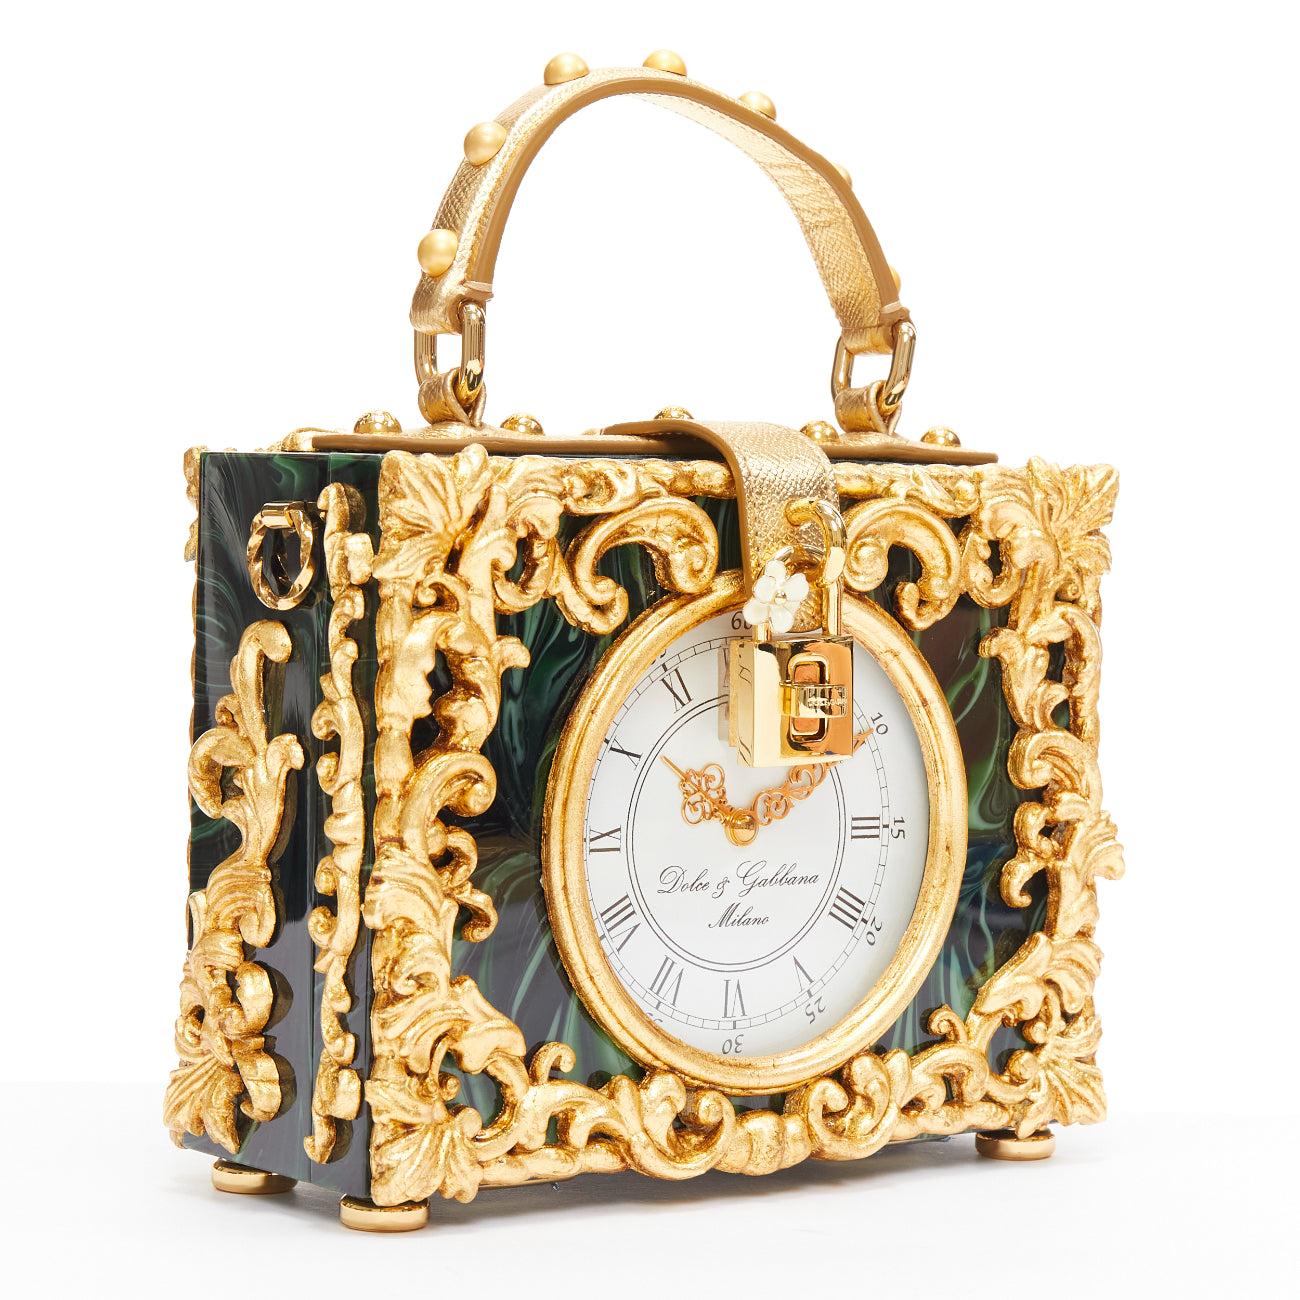 rare DOLCE GABBANA Box Orologio Barocco gold metal green marble resin vanity bag
Reference: TGAS/D01025
Brand: Dolce Gabbana
Designer: Domenico Dolce and Stefano Gabbana
Model: Box Orologio Barocco
Material: Acetate, Metal, Leather
Color: Green,